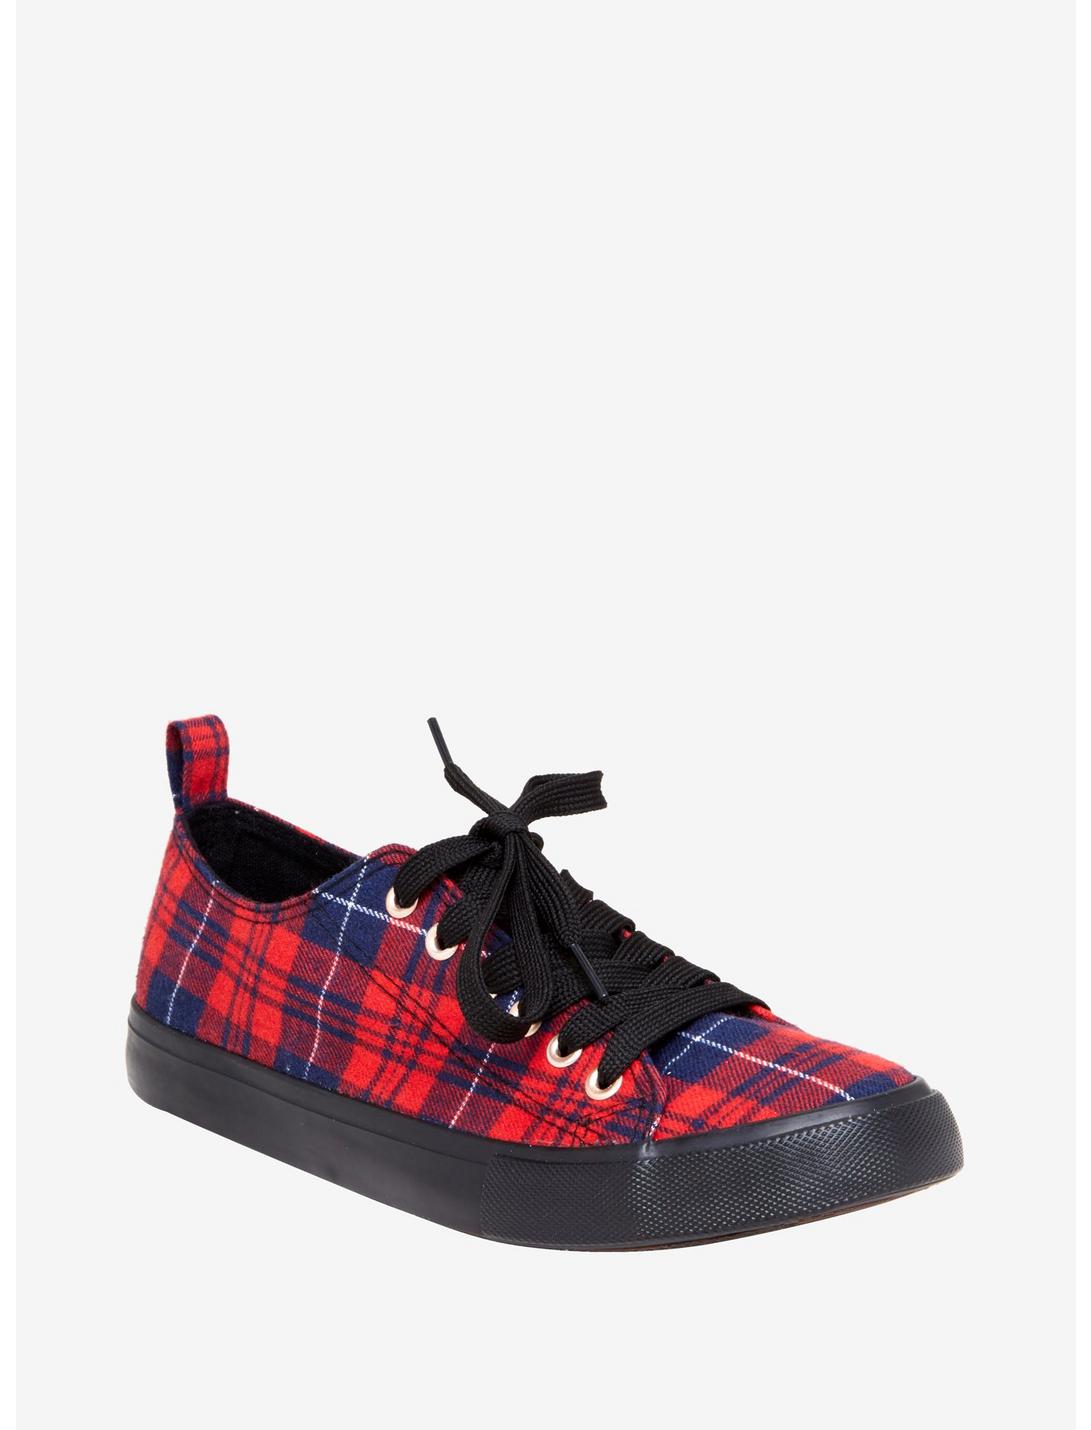 Black & Red Plaid Lace-Up Sneakers, MULTI, hi-res